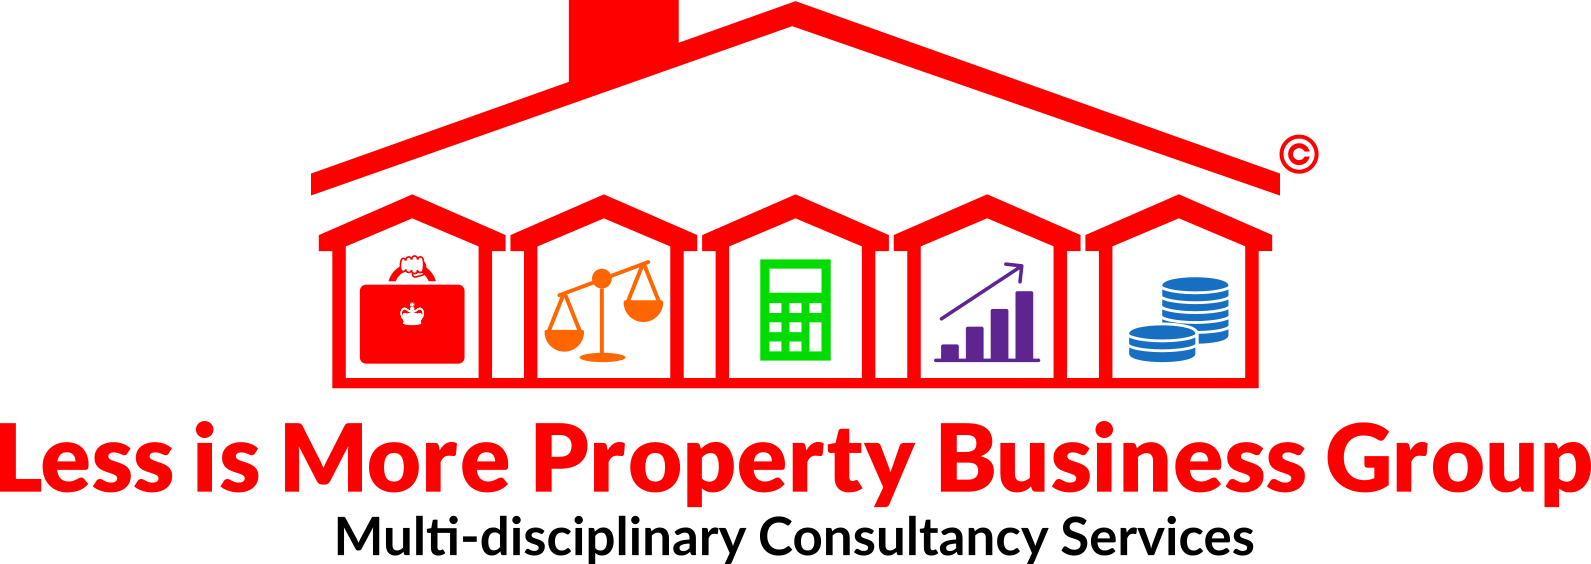 Less is More Property Business Group